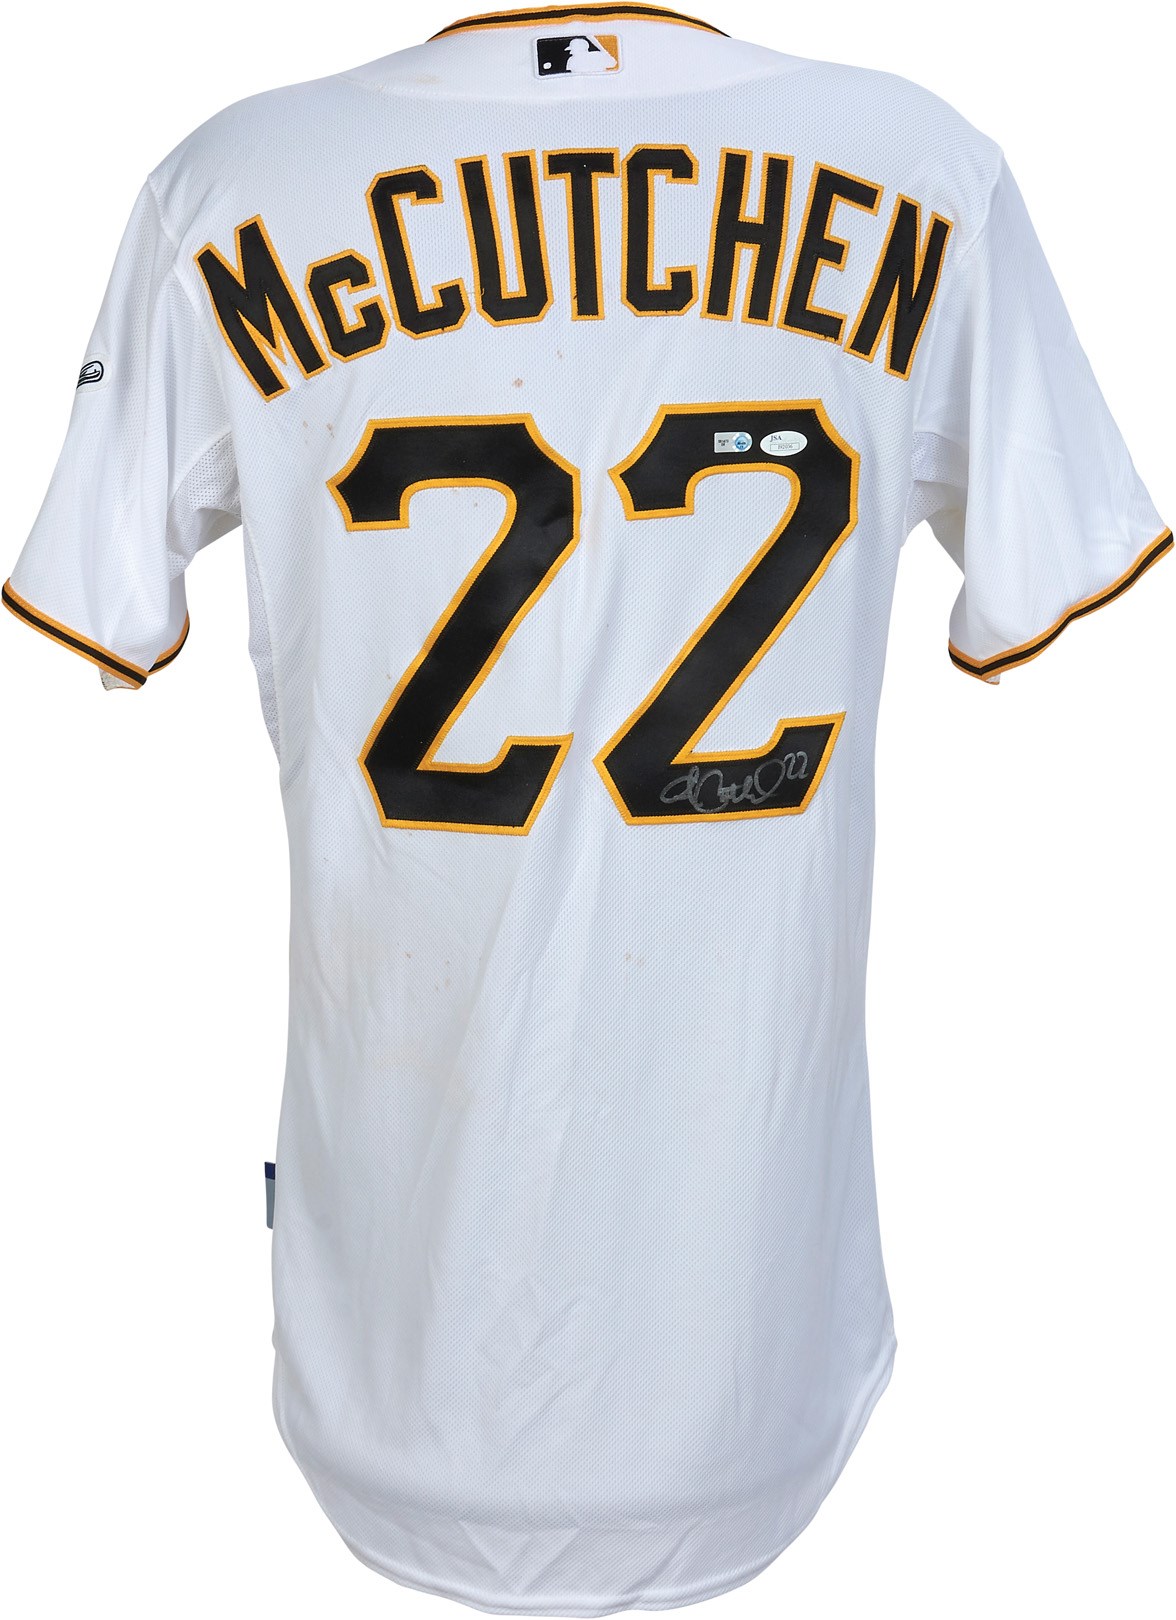 - 2013 MVP Andrew McCutchen Game Worn & Signed Pirates Jersey (MLB Auth. & Photo-Matched)